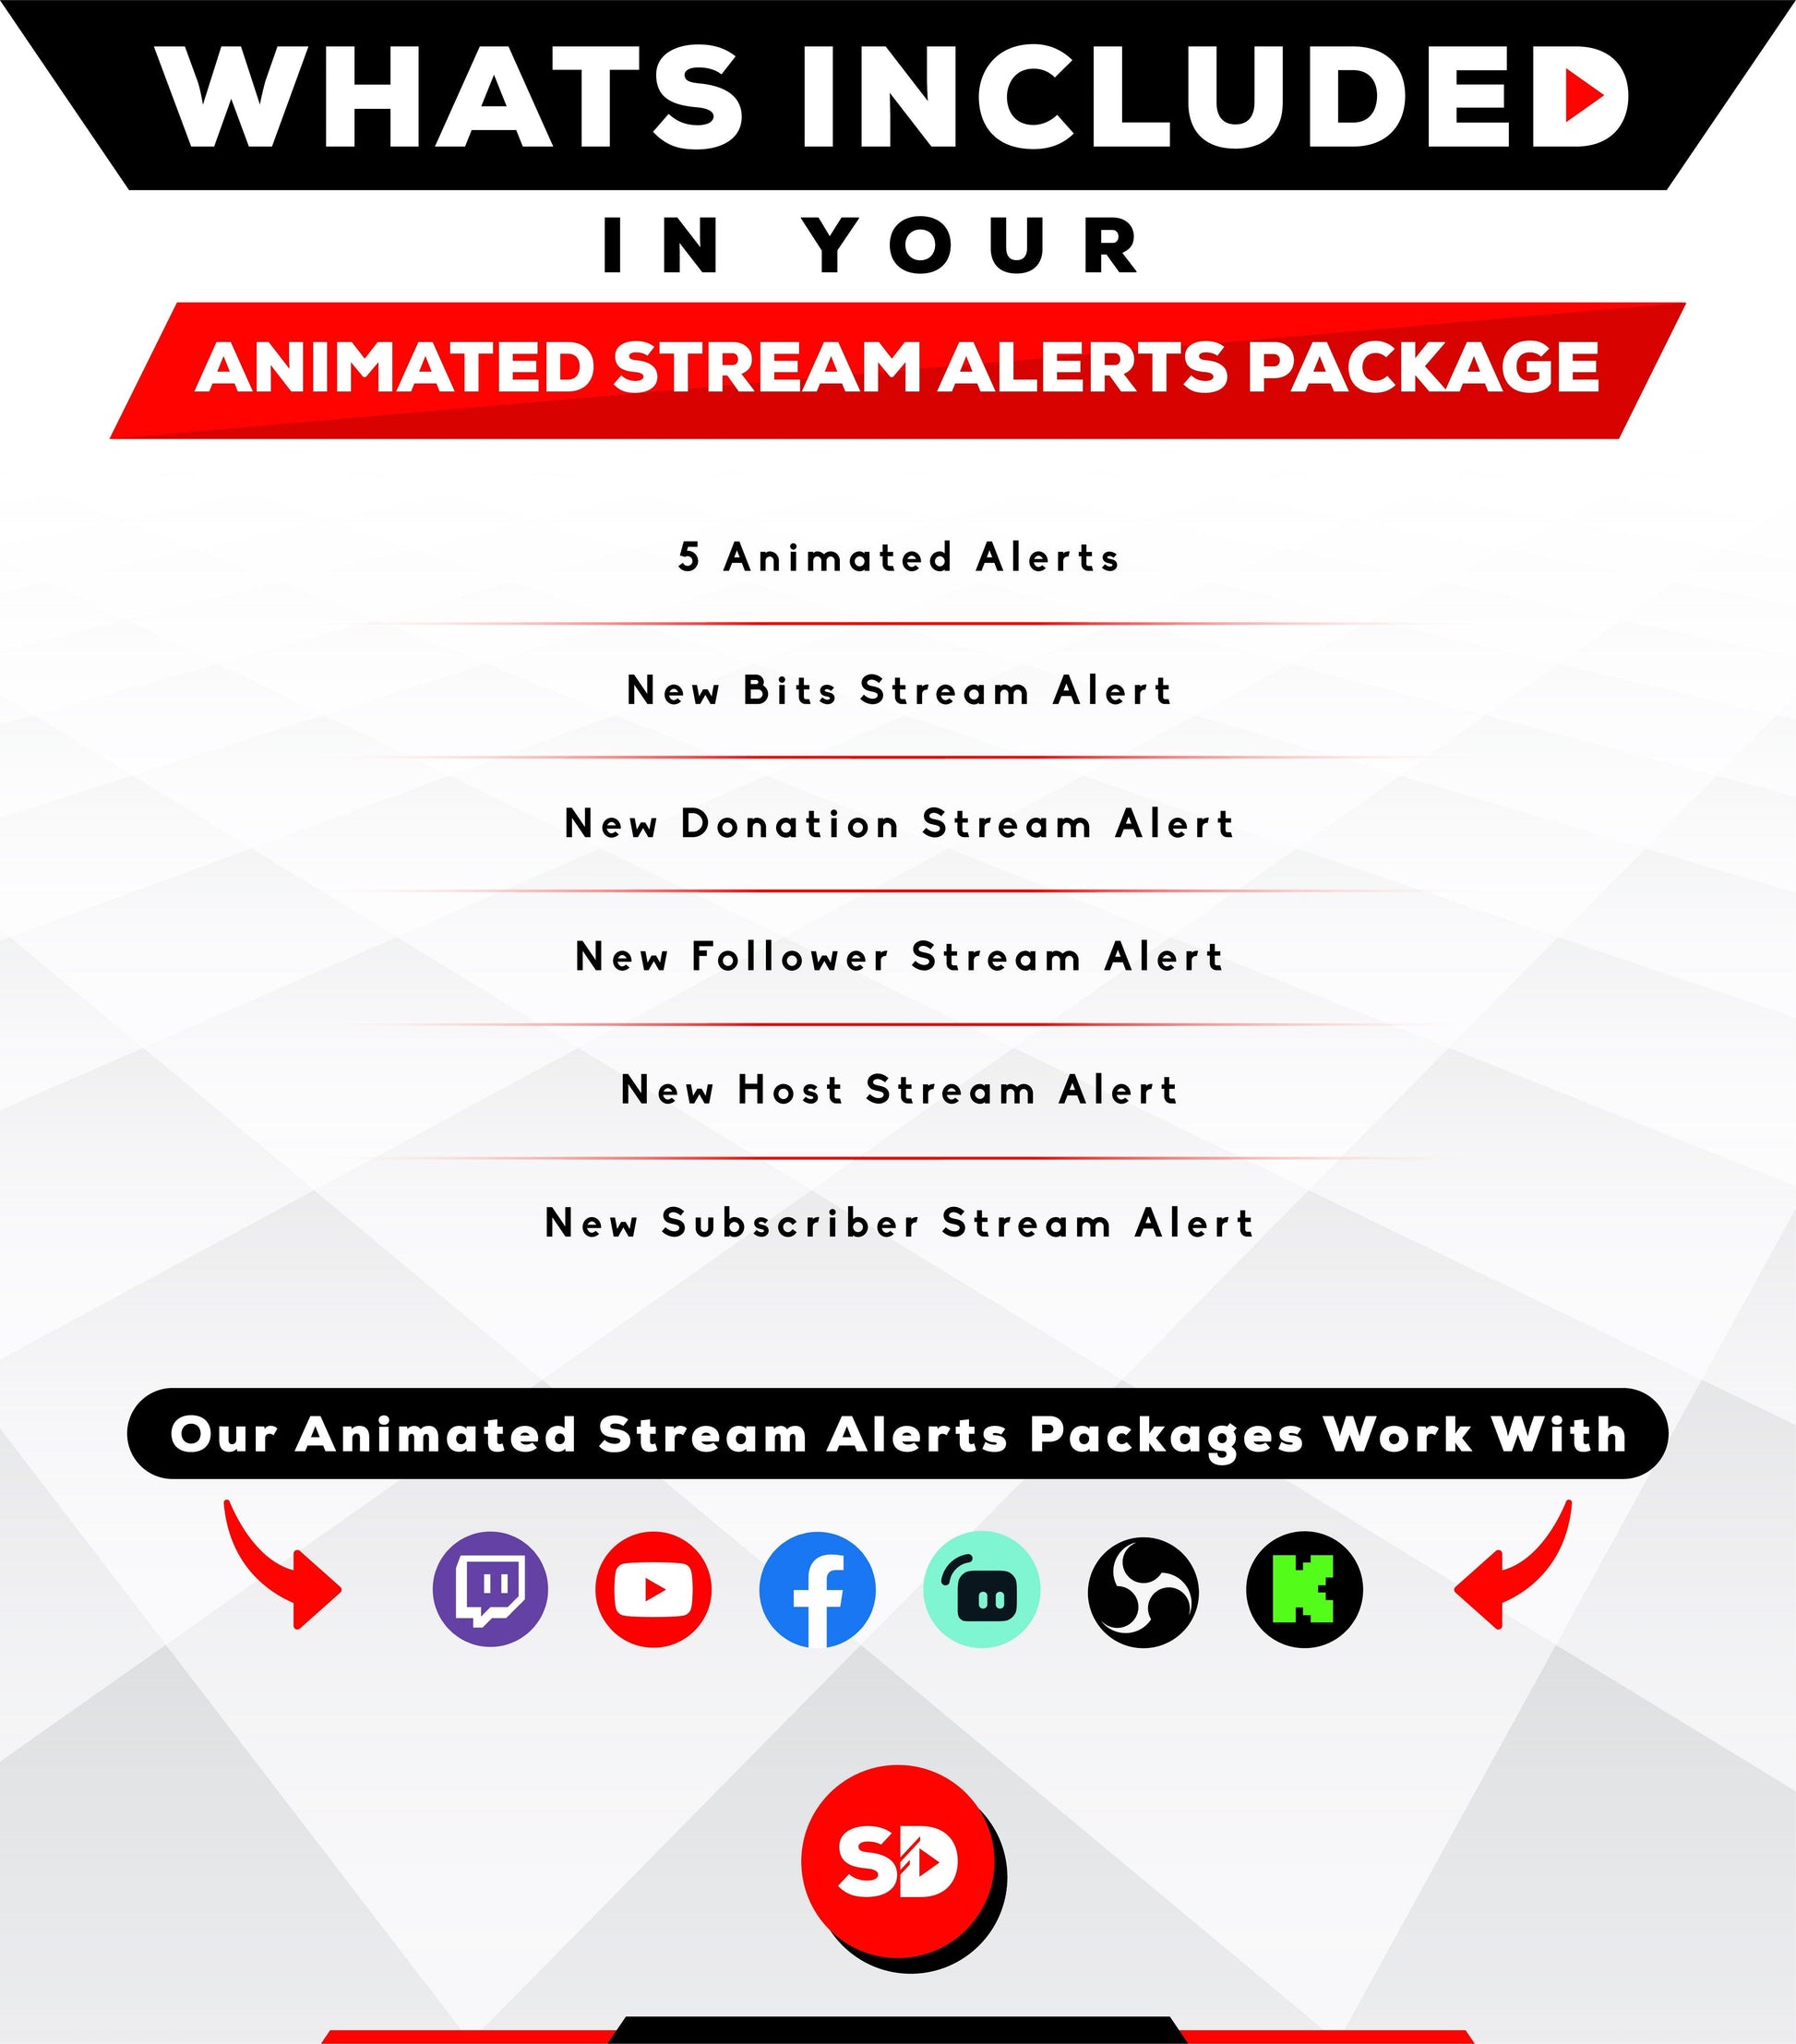 Whats included in your package - Alerts - Eye of the tiger